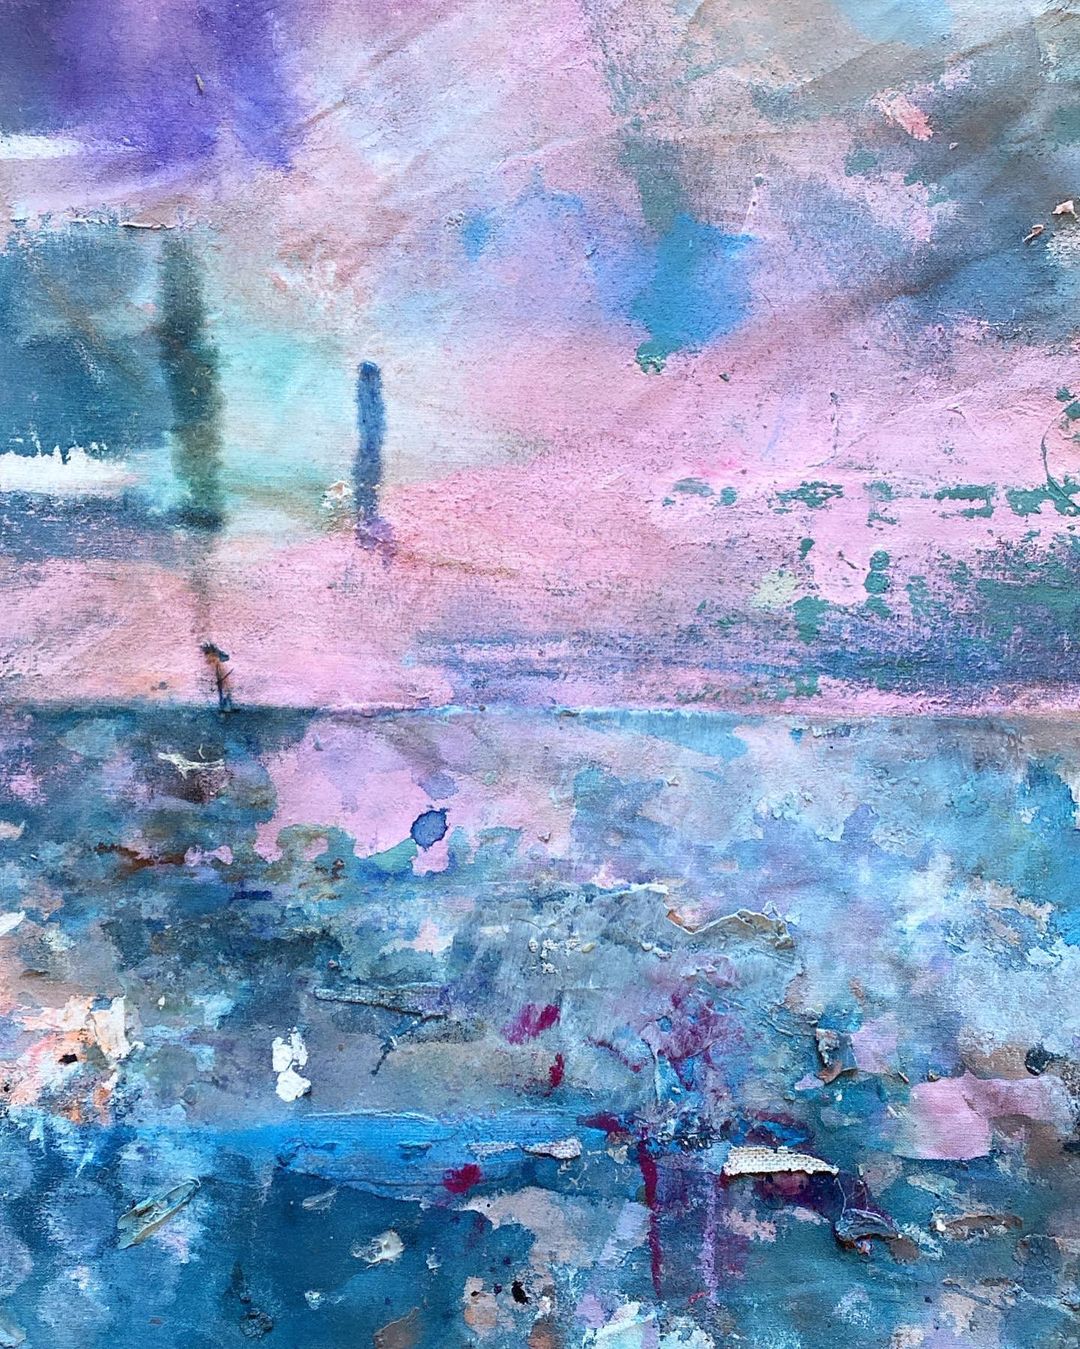 Close-up of an abstract artwork painted in shades of pink and blue